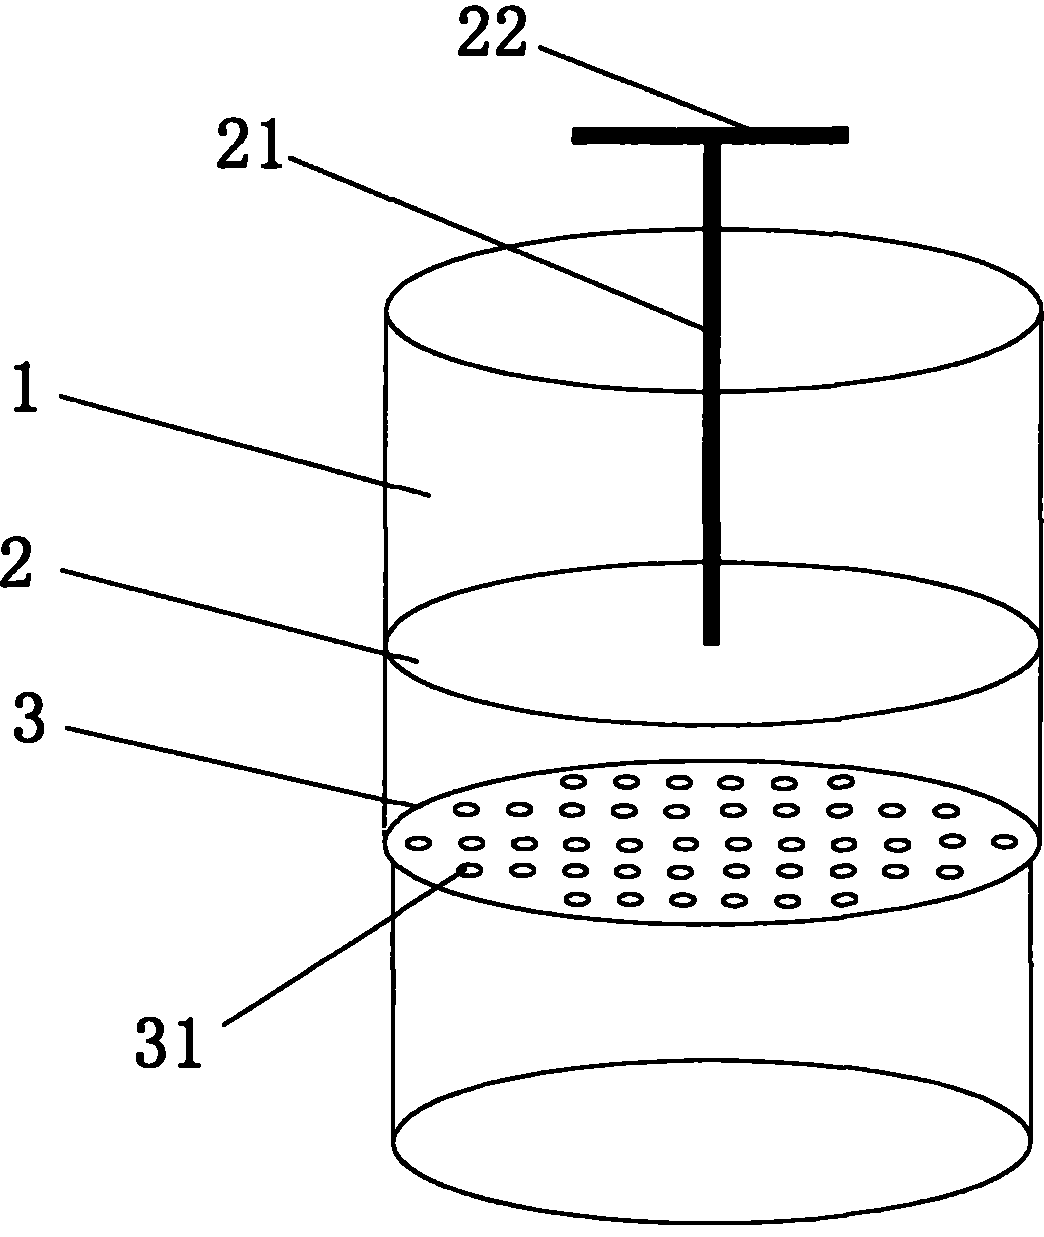 Method for manufacturing cleaning cloth wringing device